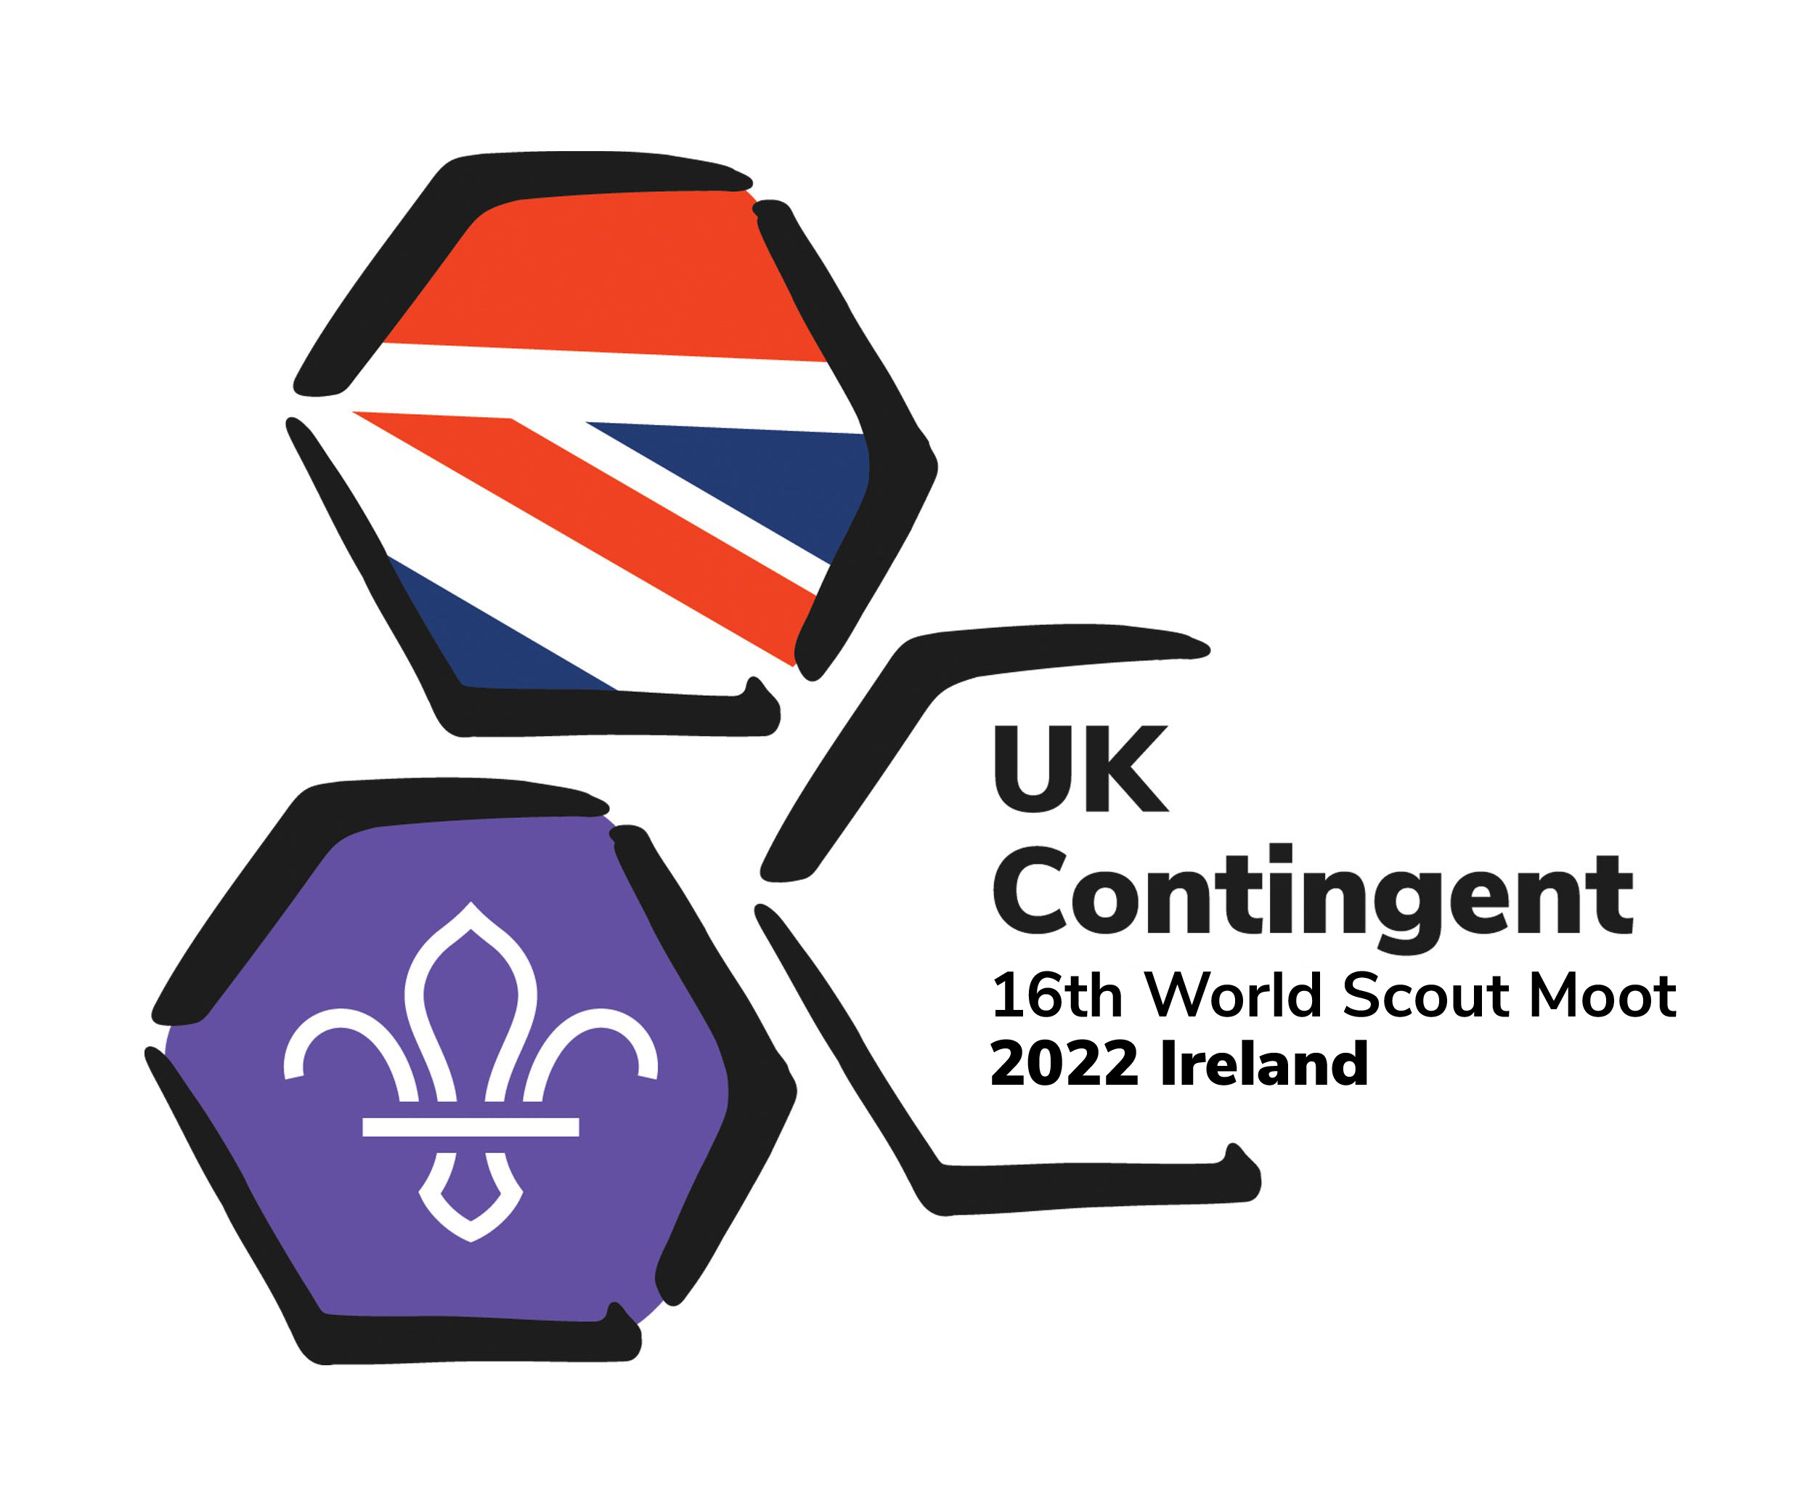 UK Contingent 16th World Scout Moot